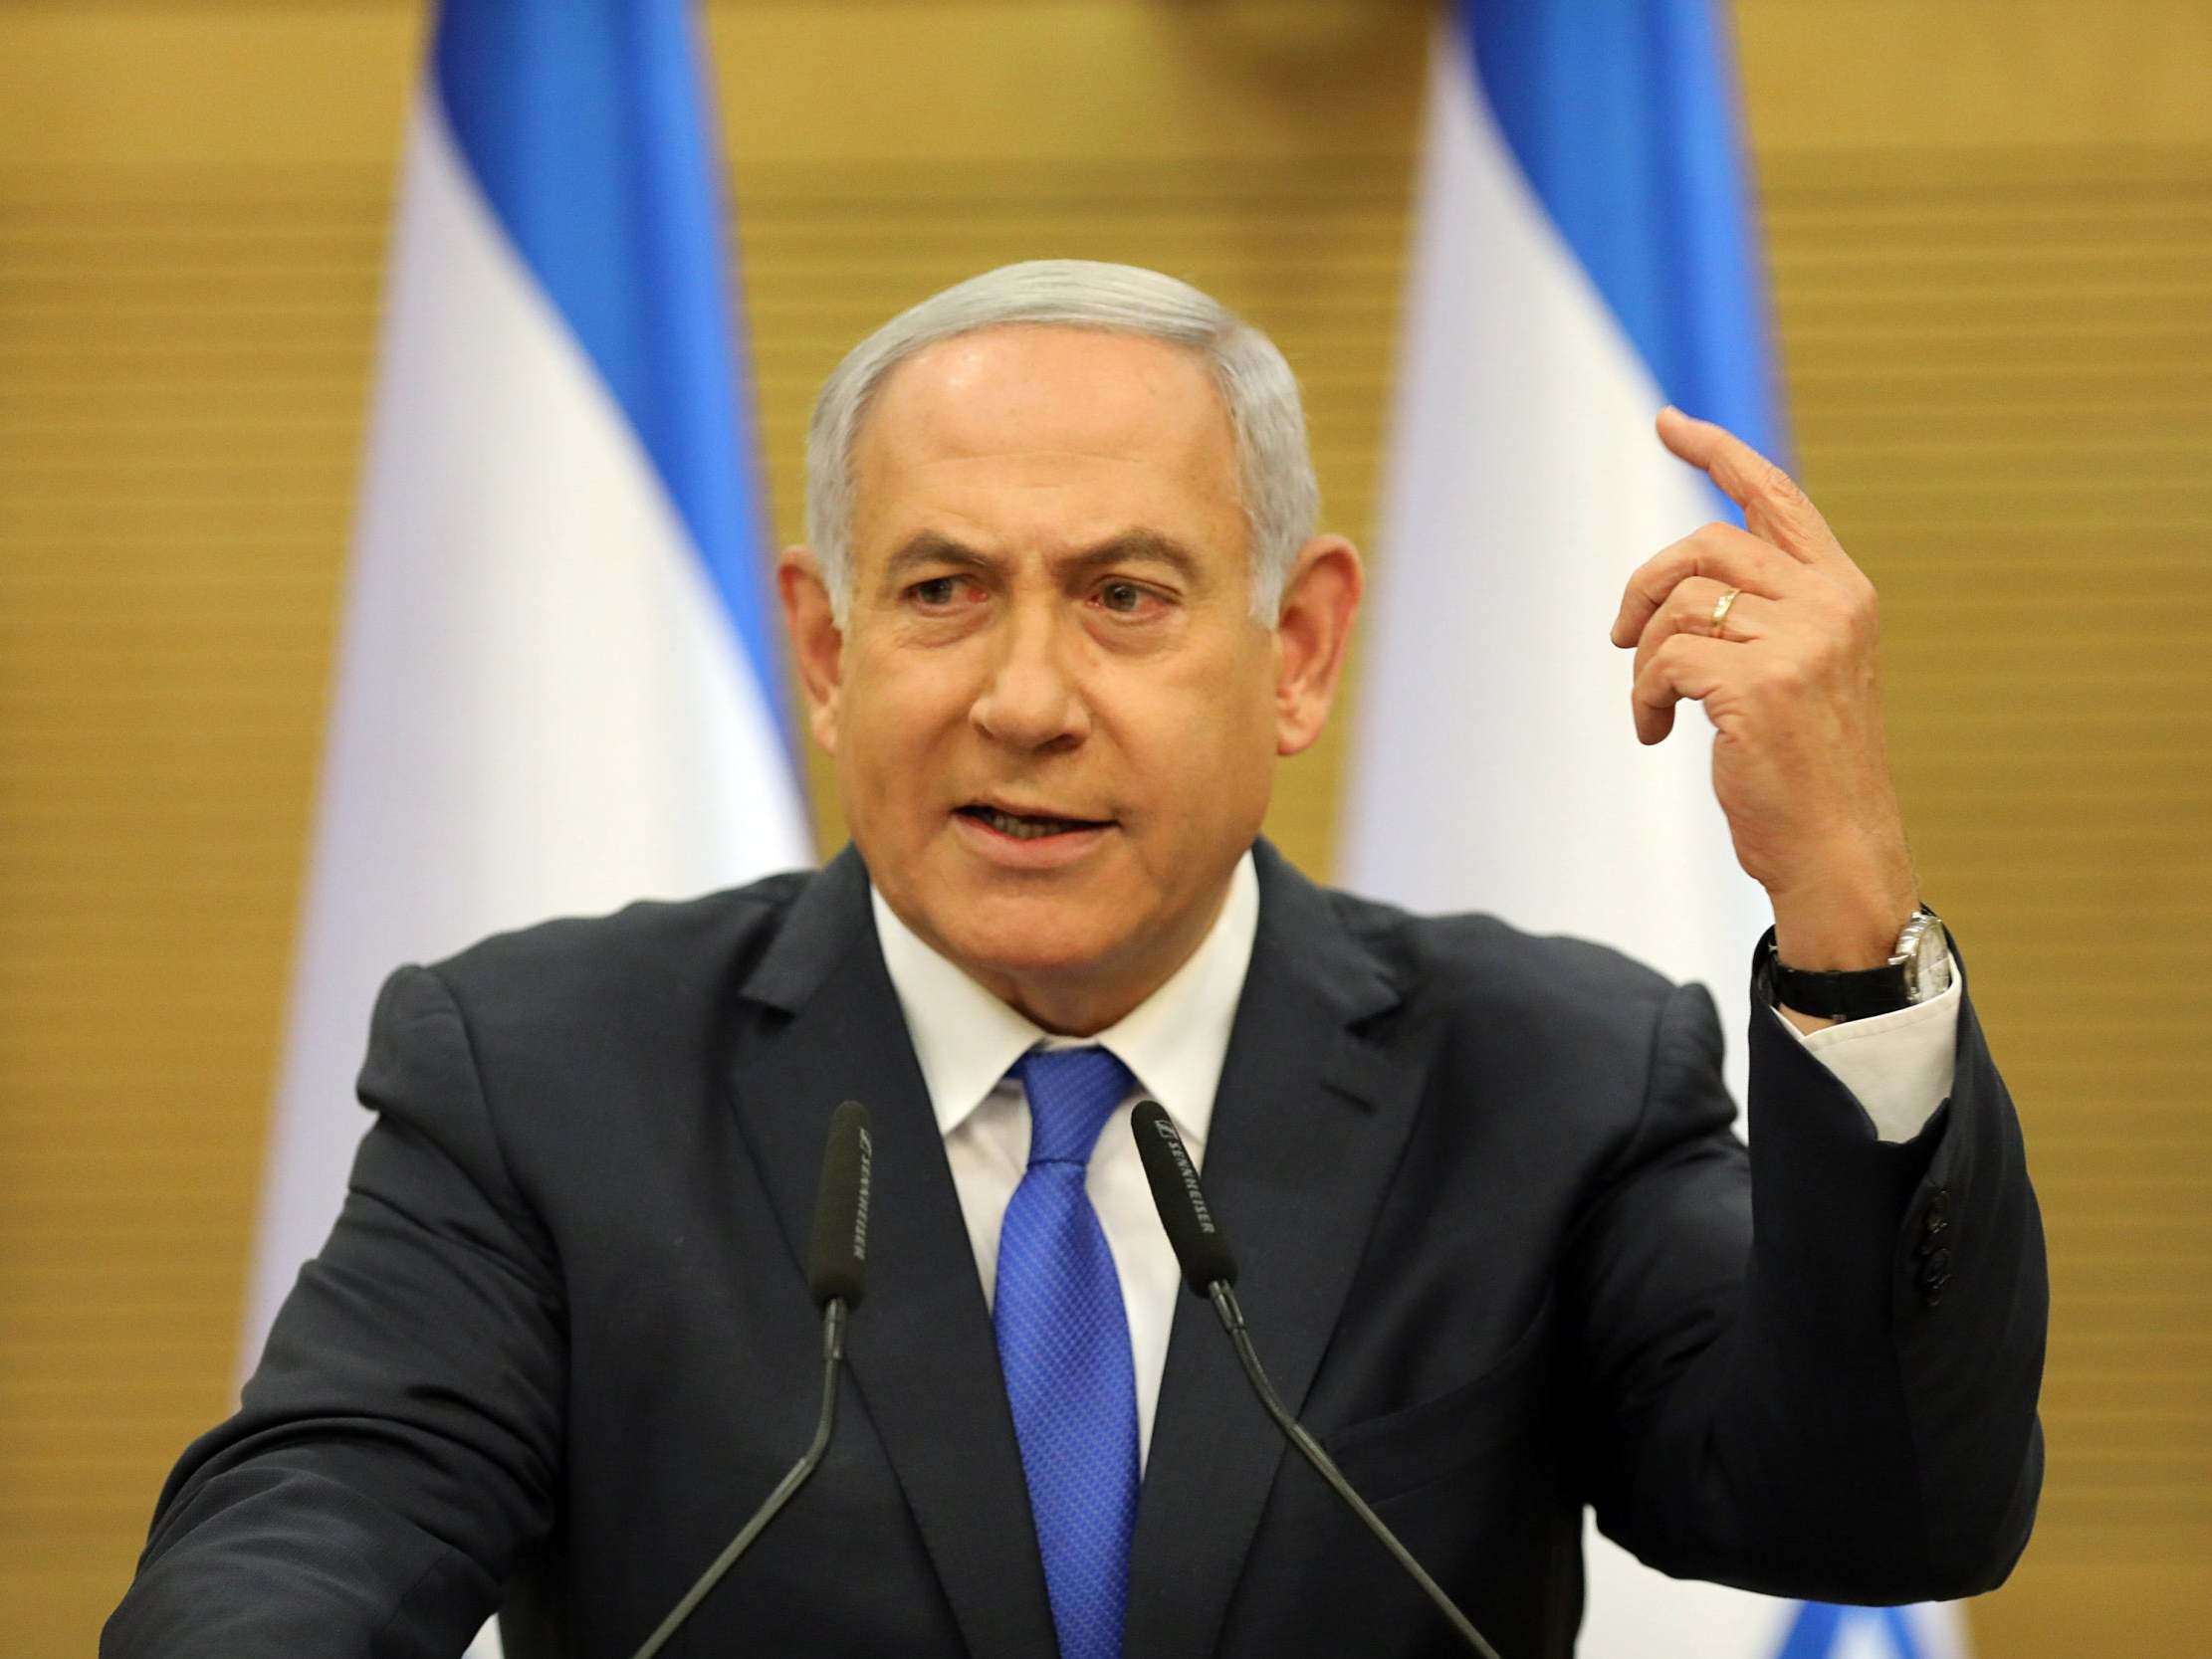 Benjamin Netanyahu delivers a statement in the Israeli parliament on 27 May 2019